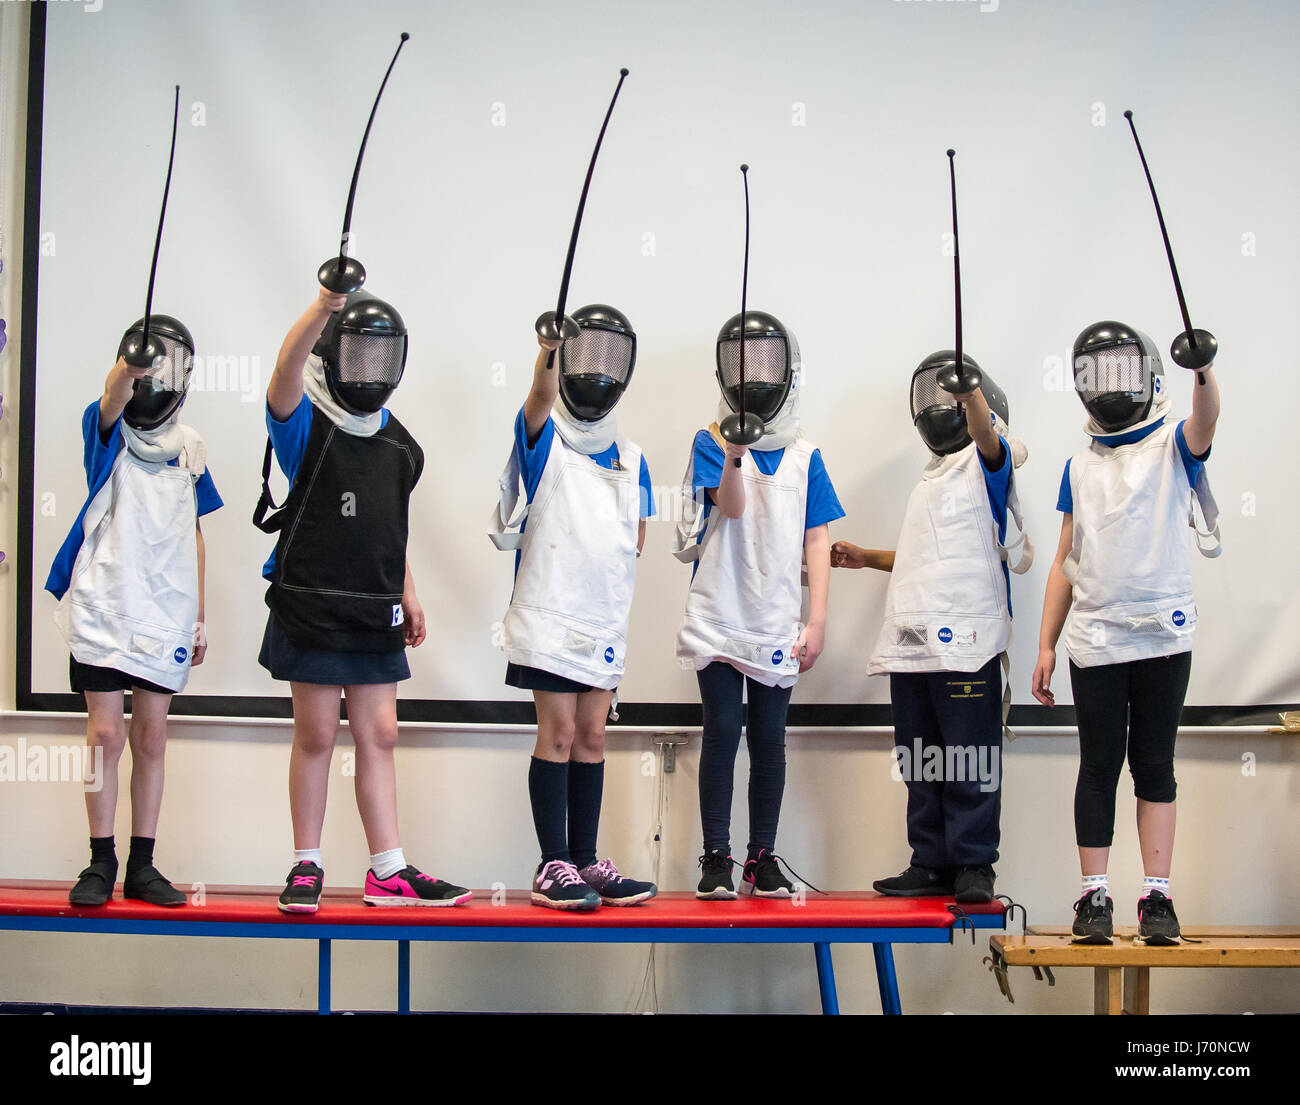 Children in a primary school learning to fence Stock Photo